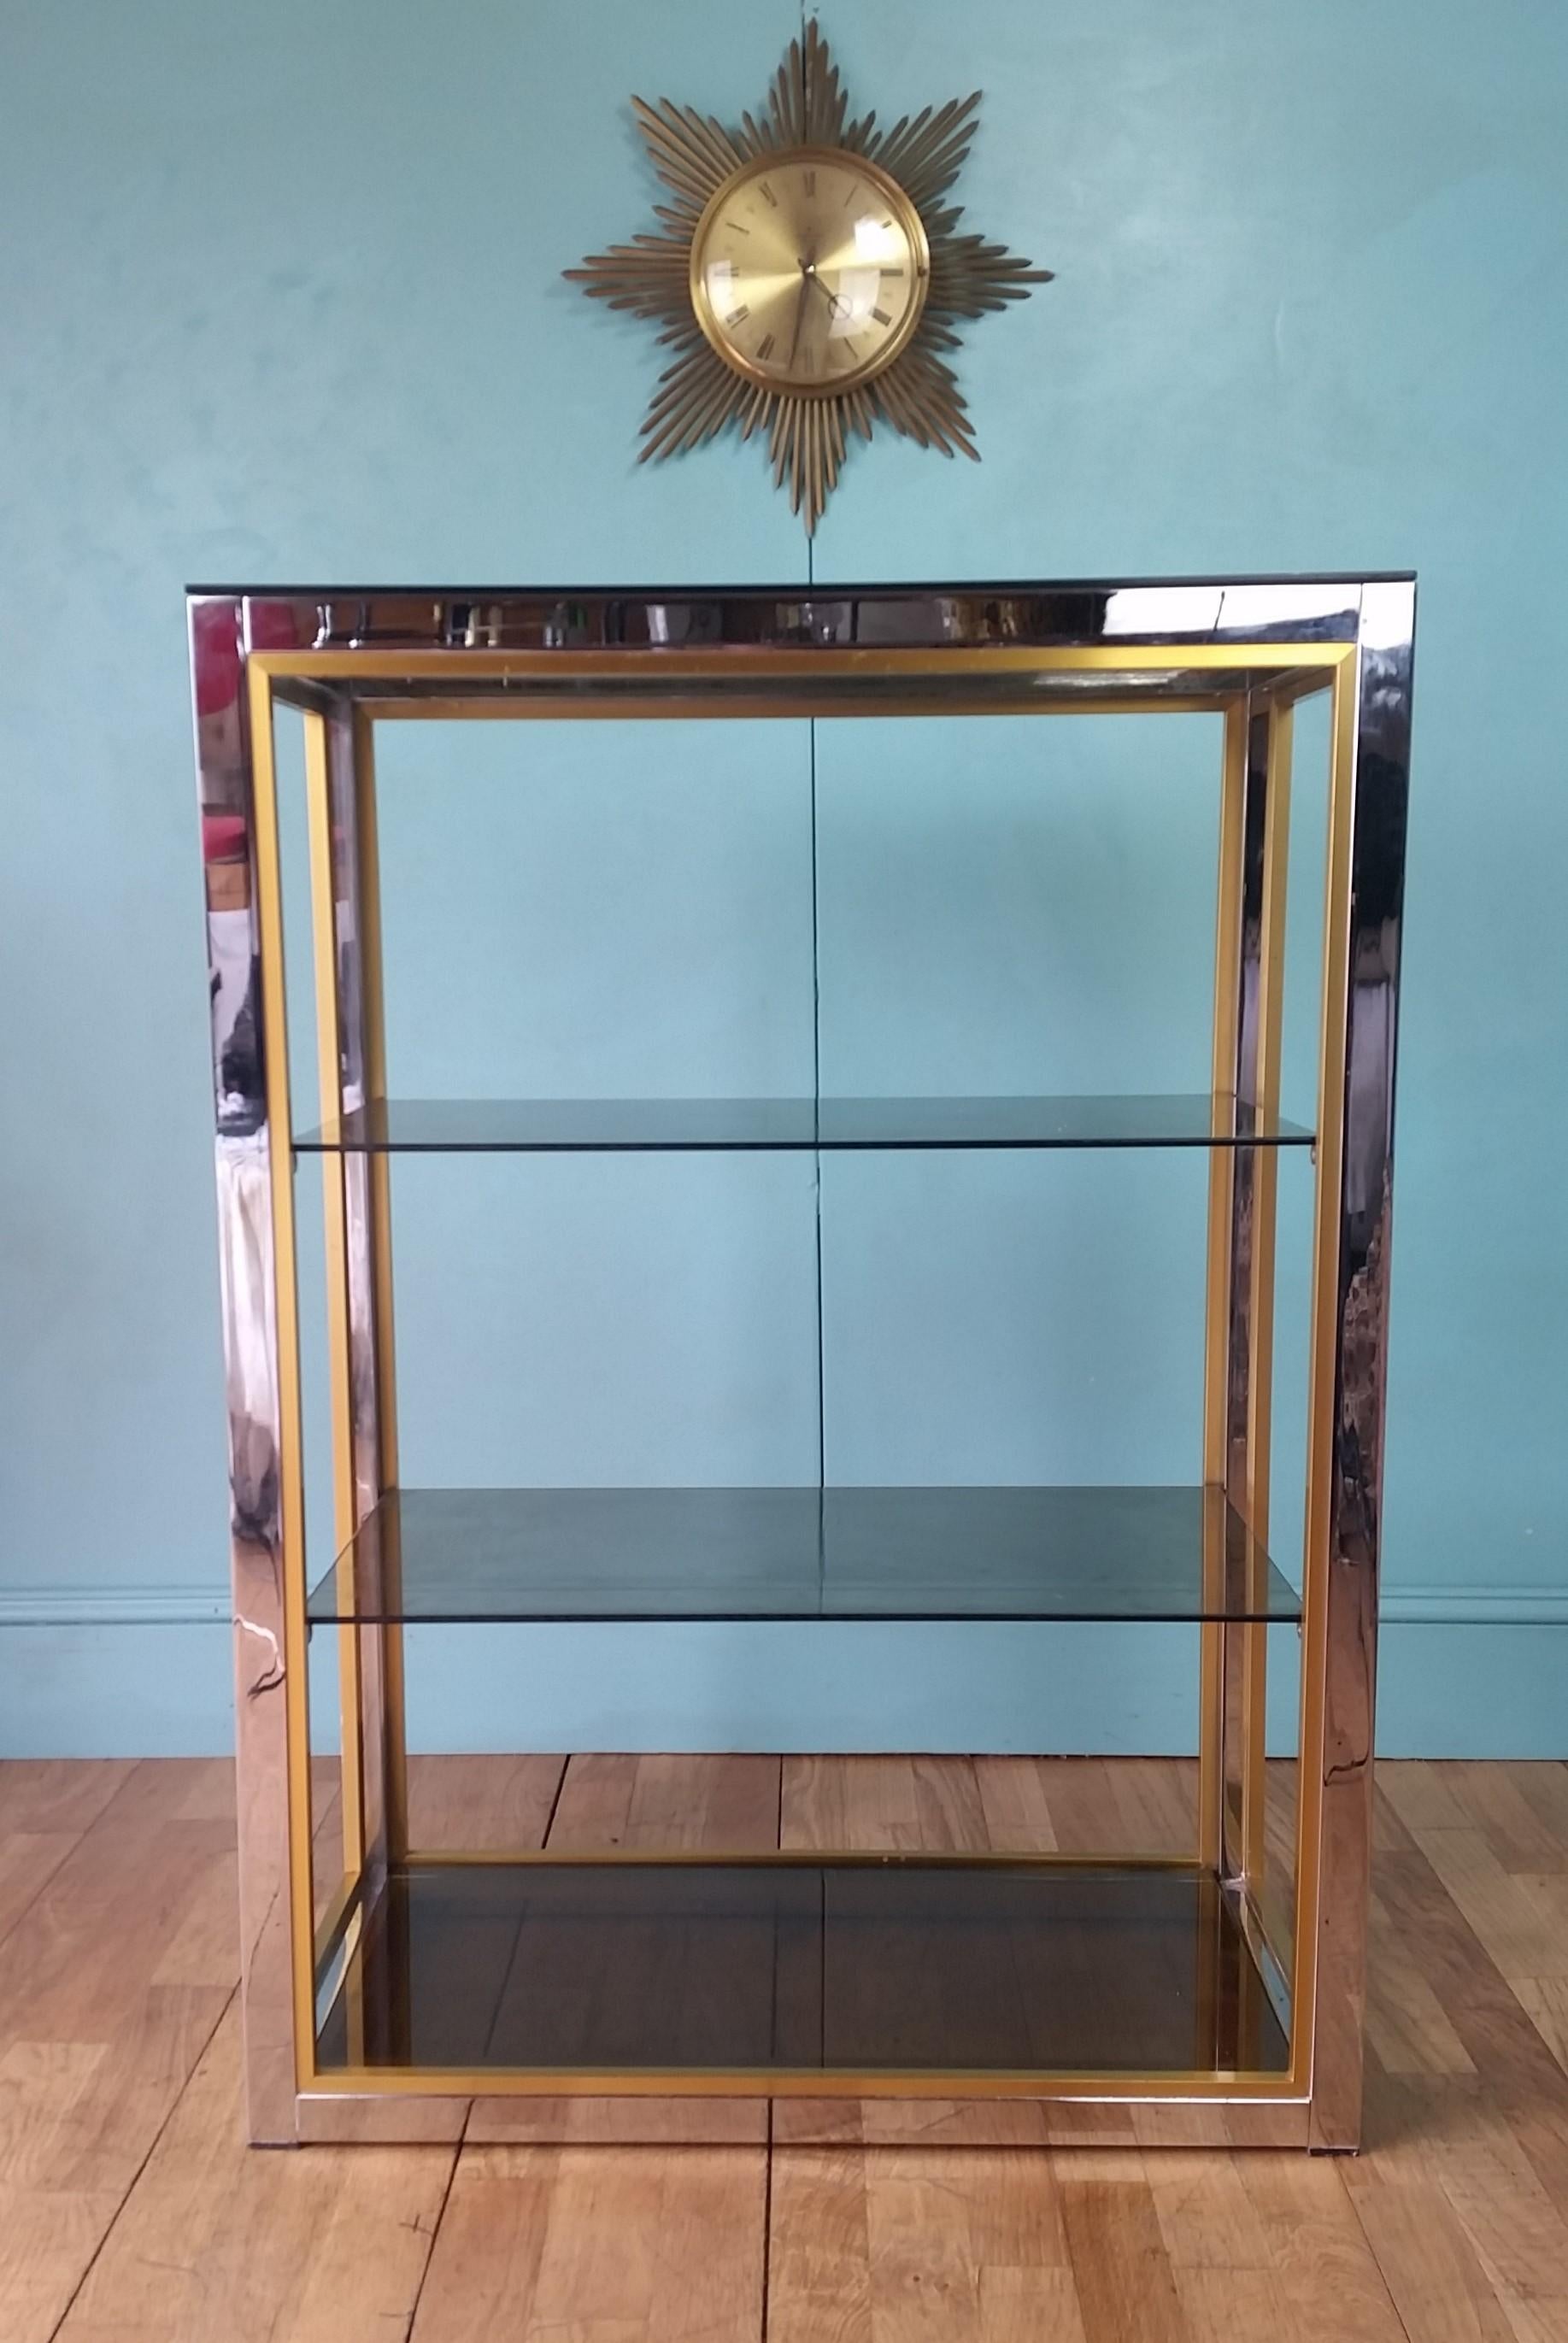 Italian display cabinet designed by Renato Zevi circa 1970's
Polished chrome finish with inner matt gold trim and original tinted glass shelves.
All in lovely vintage condition and full working order with no damage to the glass.
Some wear and